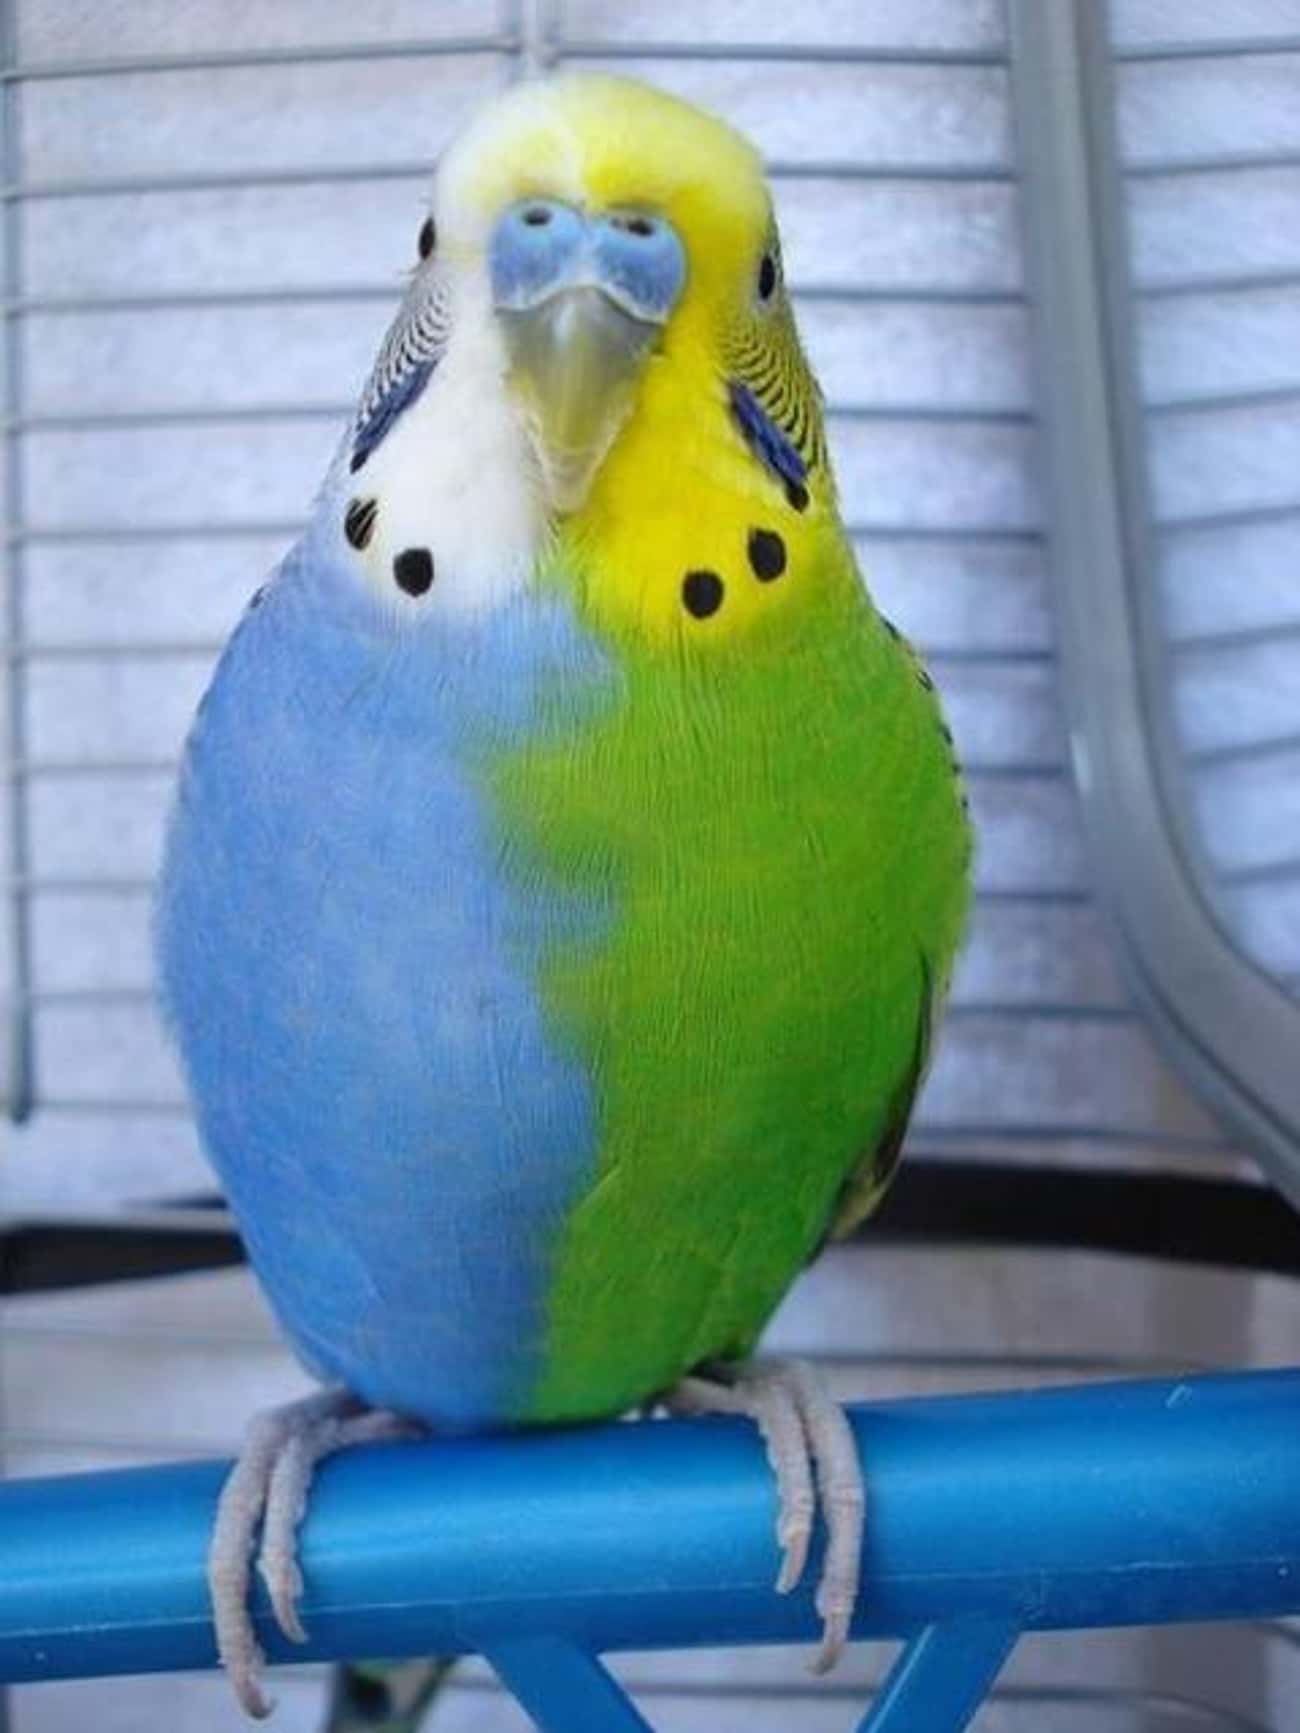 A Parakeet With Two Distinct Colorings